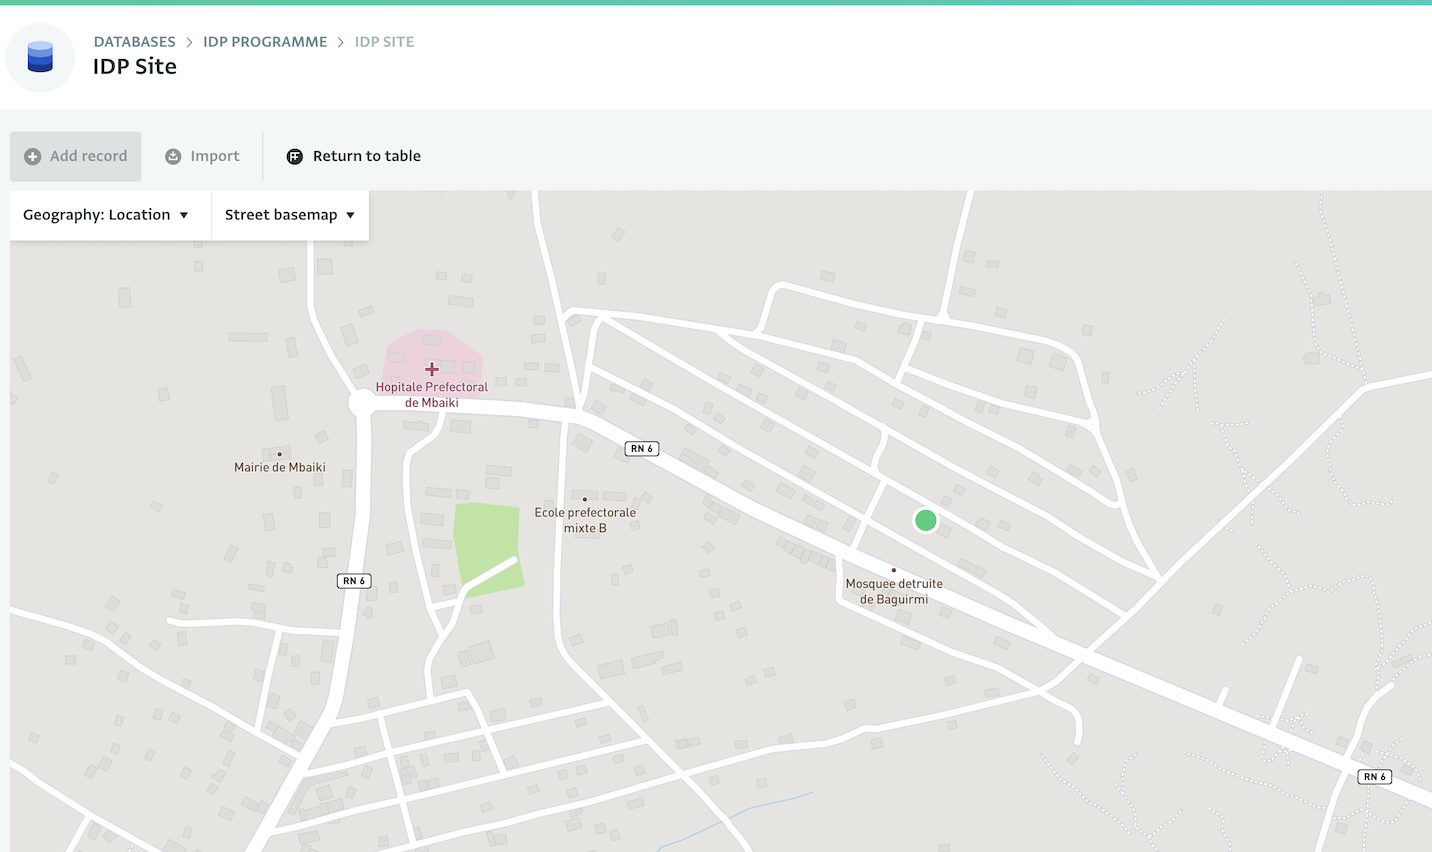 Street basemap for the IDP sites form